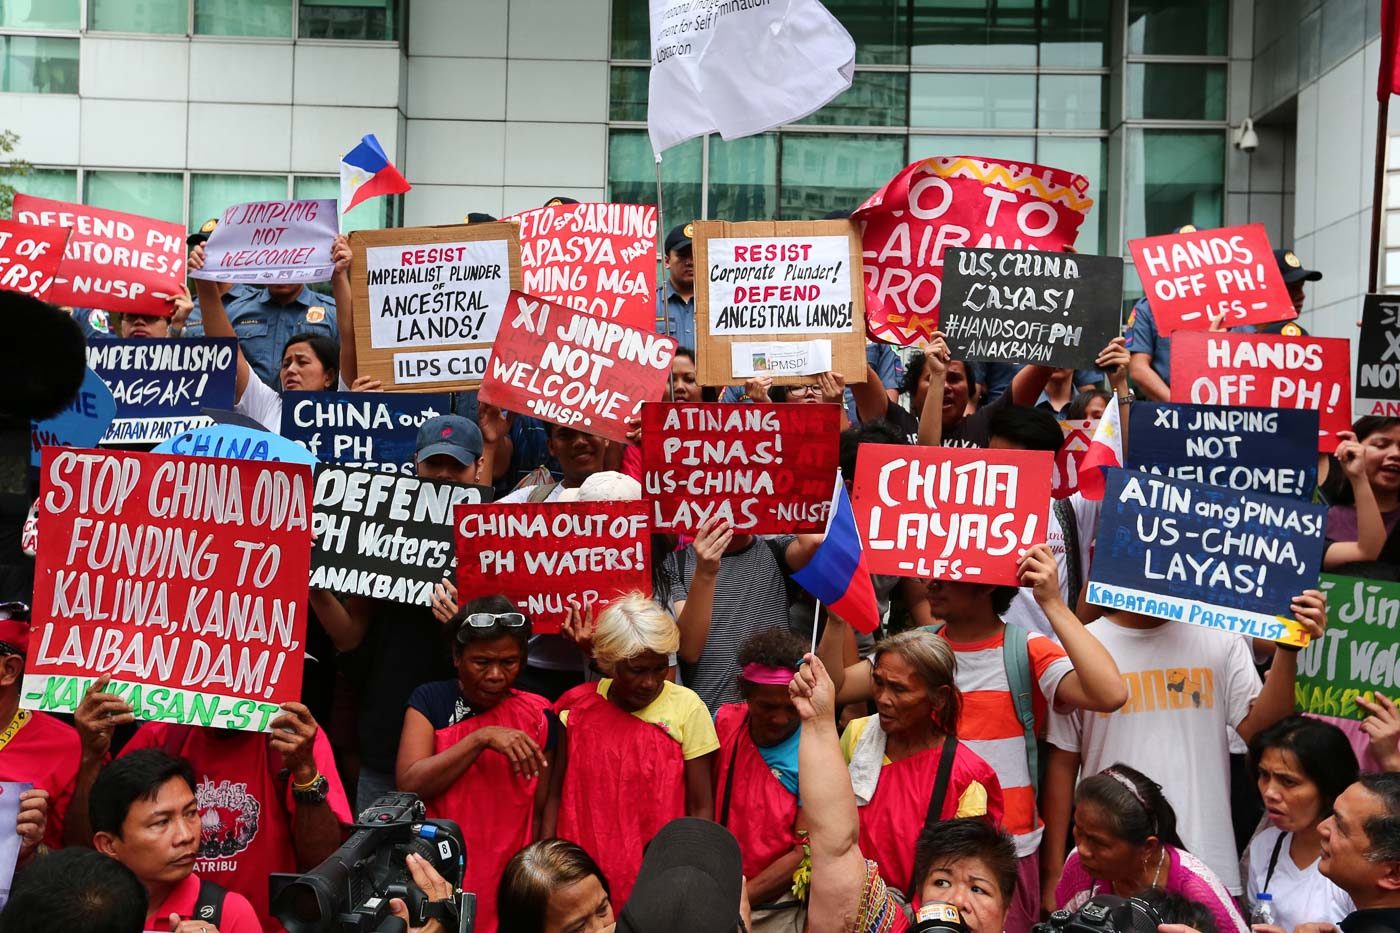 STRONG STATEMENTS. People carry signs to show their strong objection to possible deals and plans with China during the protest at the Chinese Consulate on the day of Xi Jinping's arrival in the Philippines. Photo by Jire Carreon/Rappler 